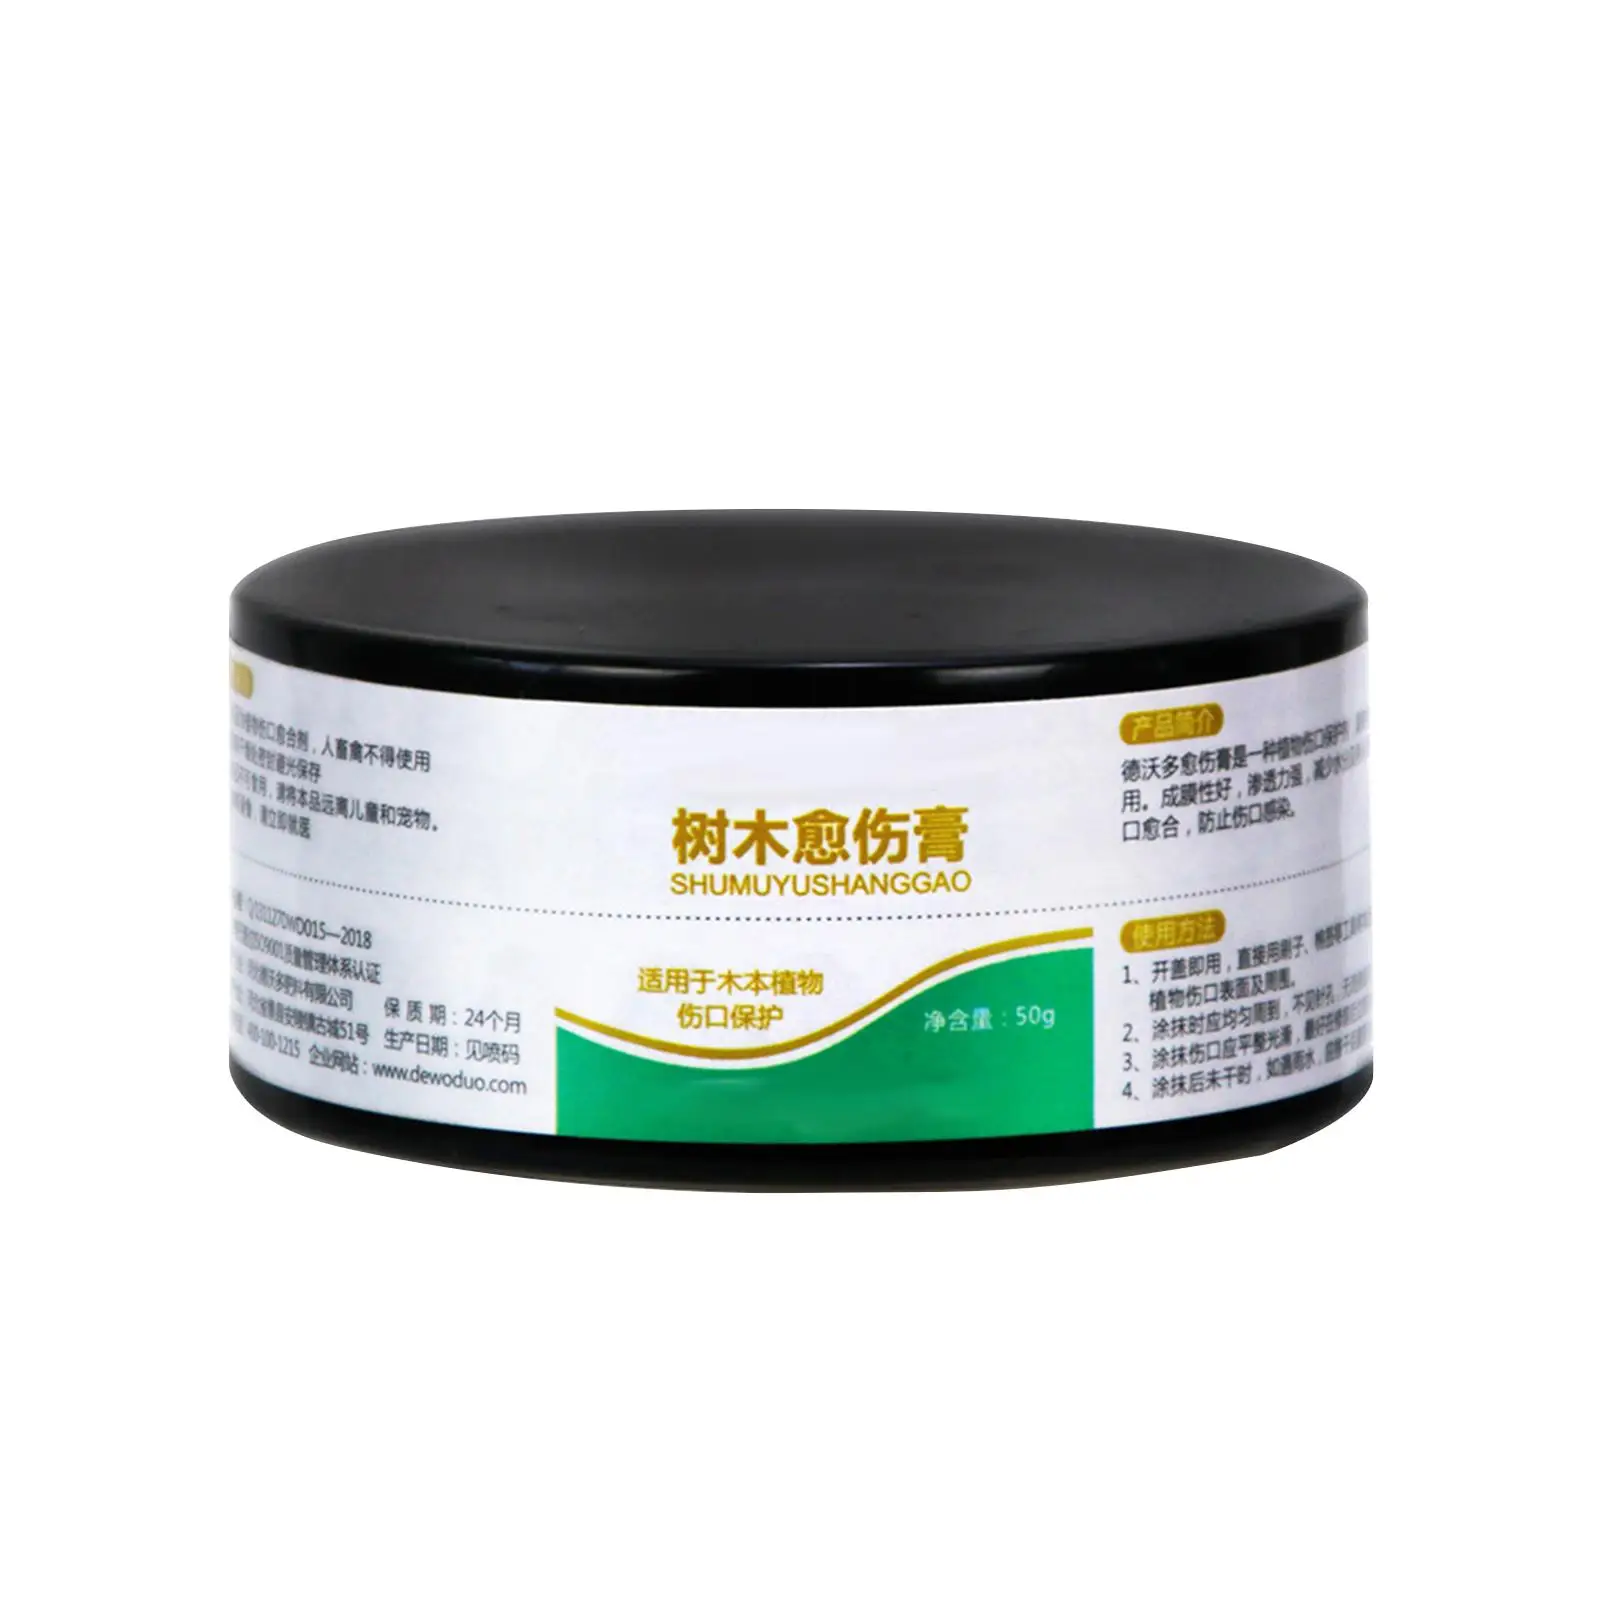 Trees Wound Sealer Professional Portable Bonsai Protective Seal for Trees Compound Sealer Bonsai Pruning Cutting Paste Gardener